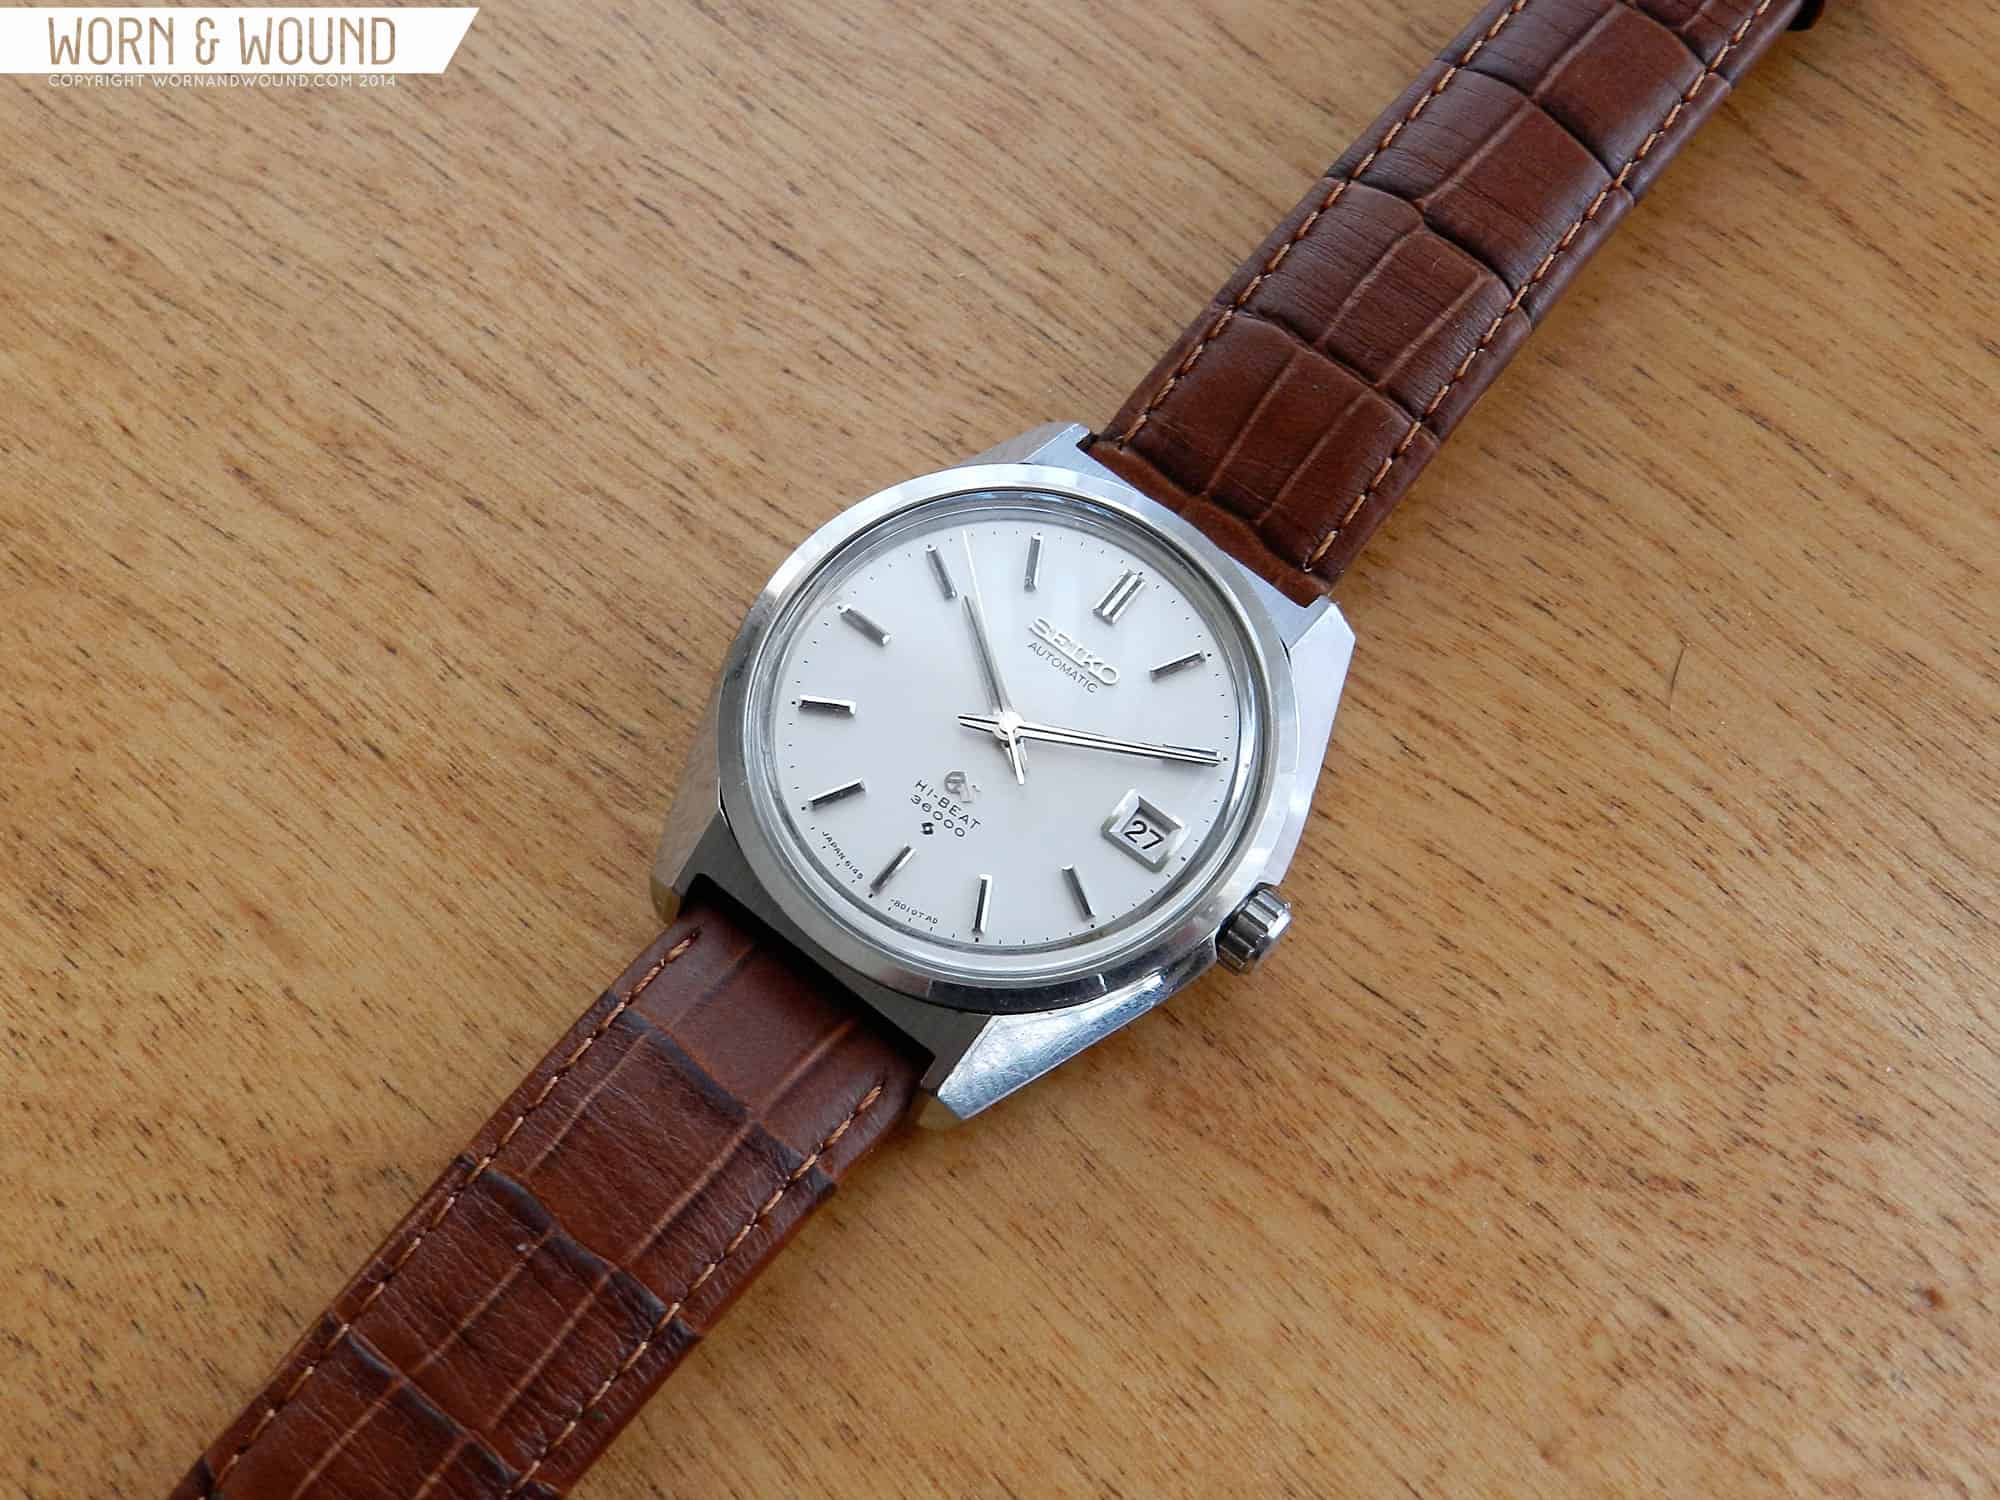 Affordable Vintage: 1970 Grand Seiko 61GS 6145-8000 - Worn & Wound